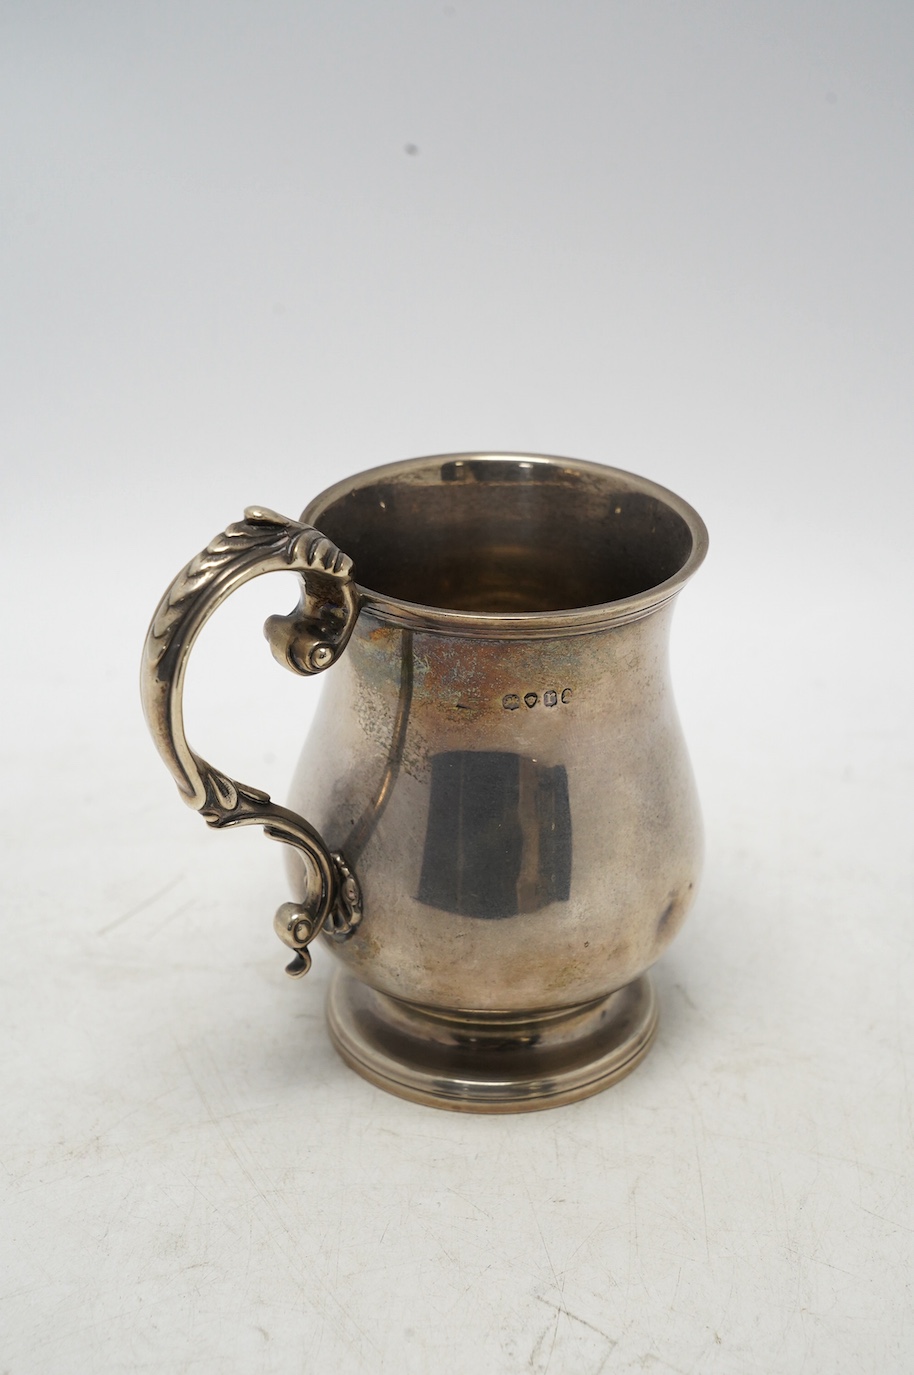 A William IV silver baluster christening mug, maker's mark rubbed, London, 1832, 11.8cm, 7.5oz, with later engraved inscription. Condition - poor